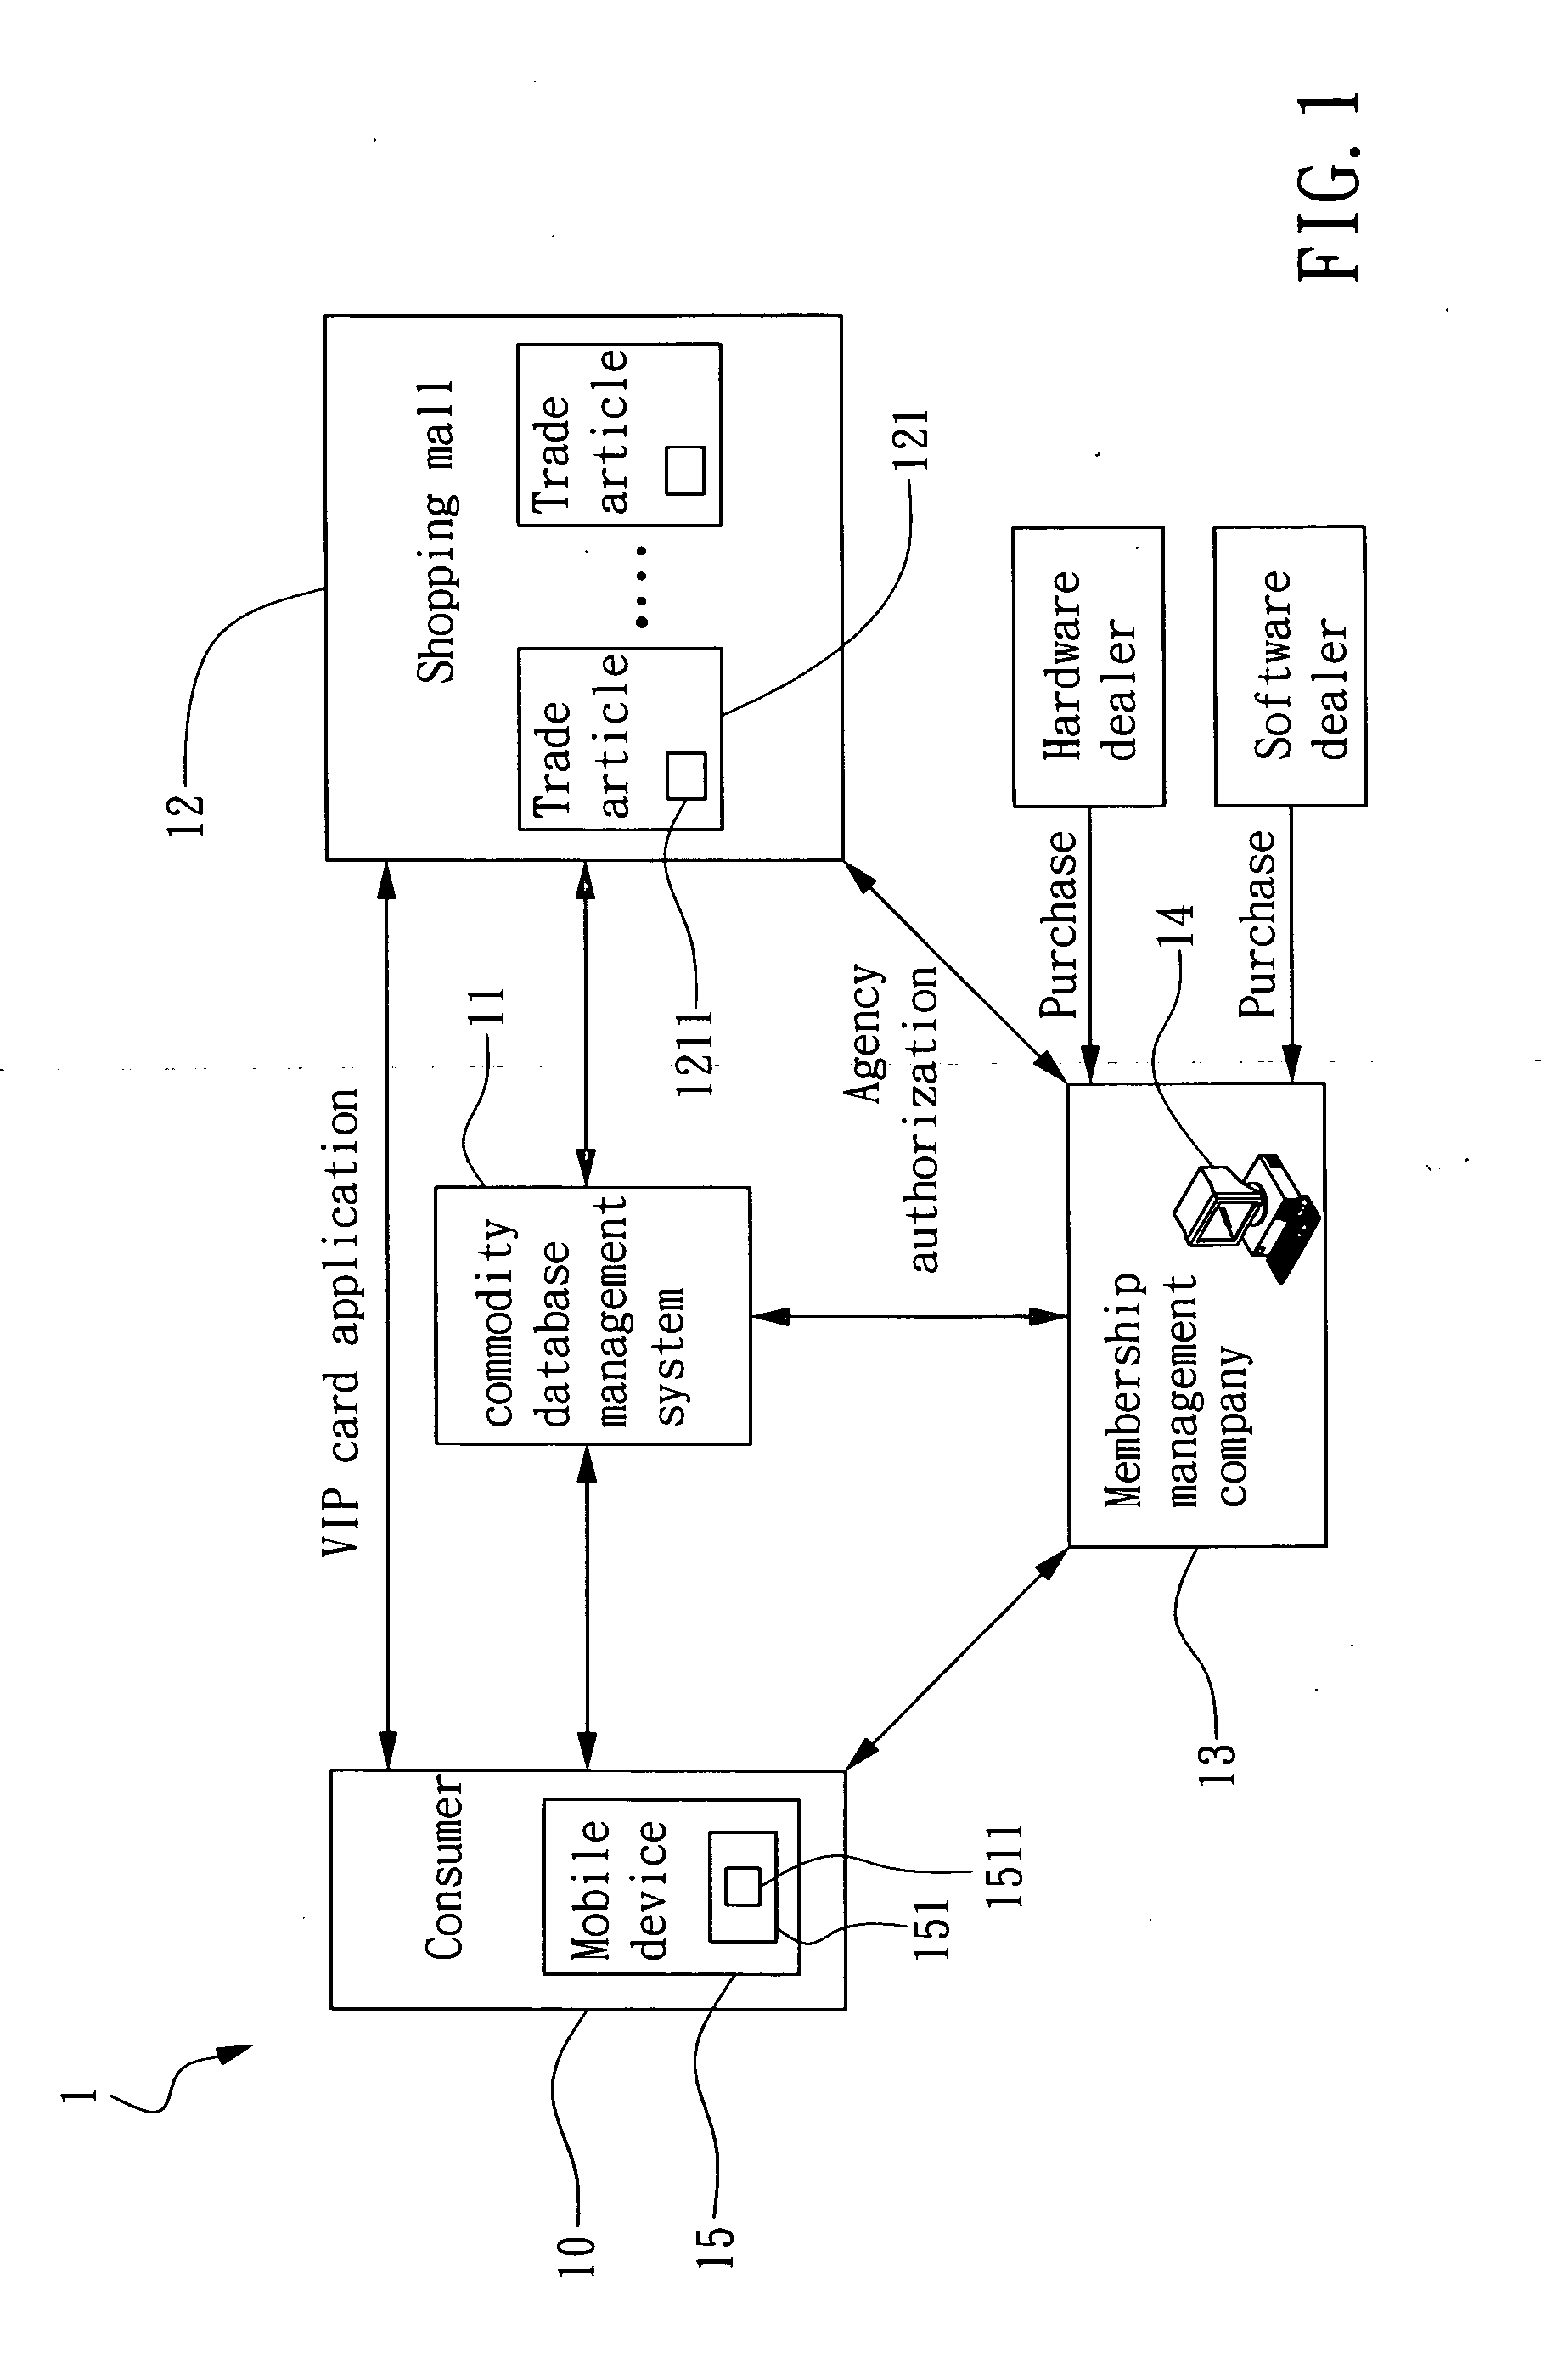 RFID-enabled personal shopping assistant system and method